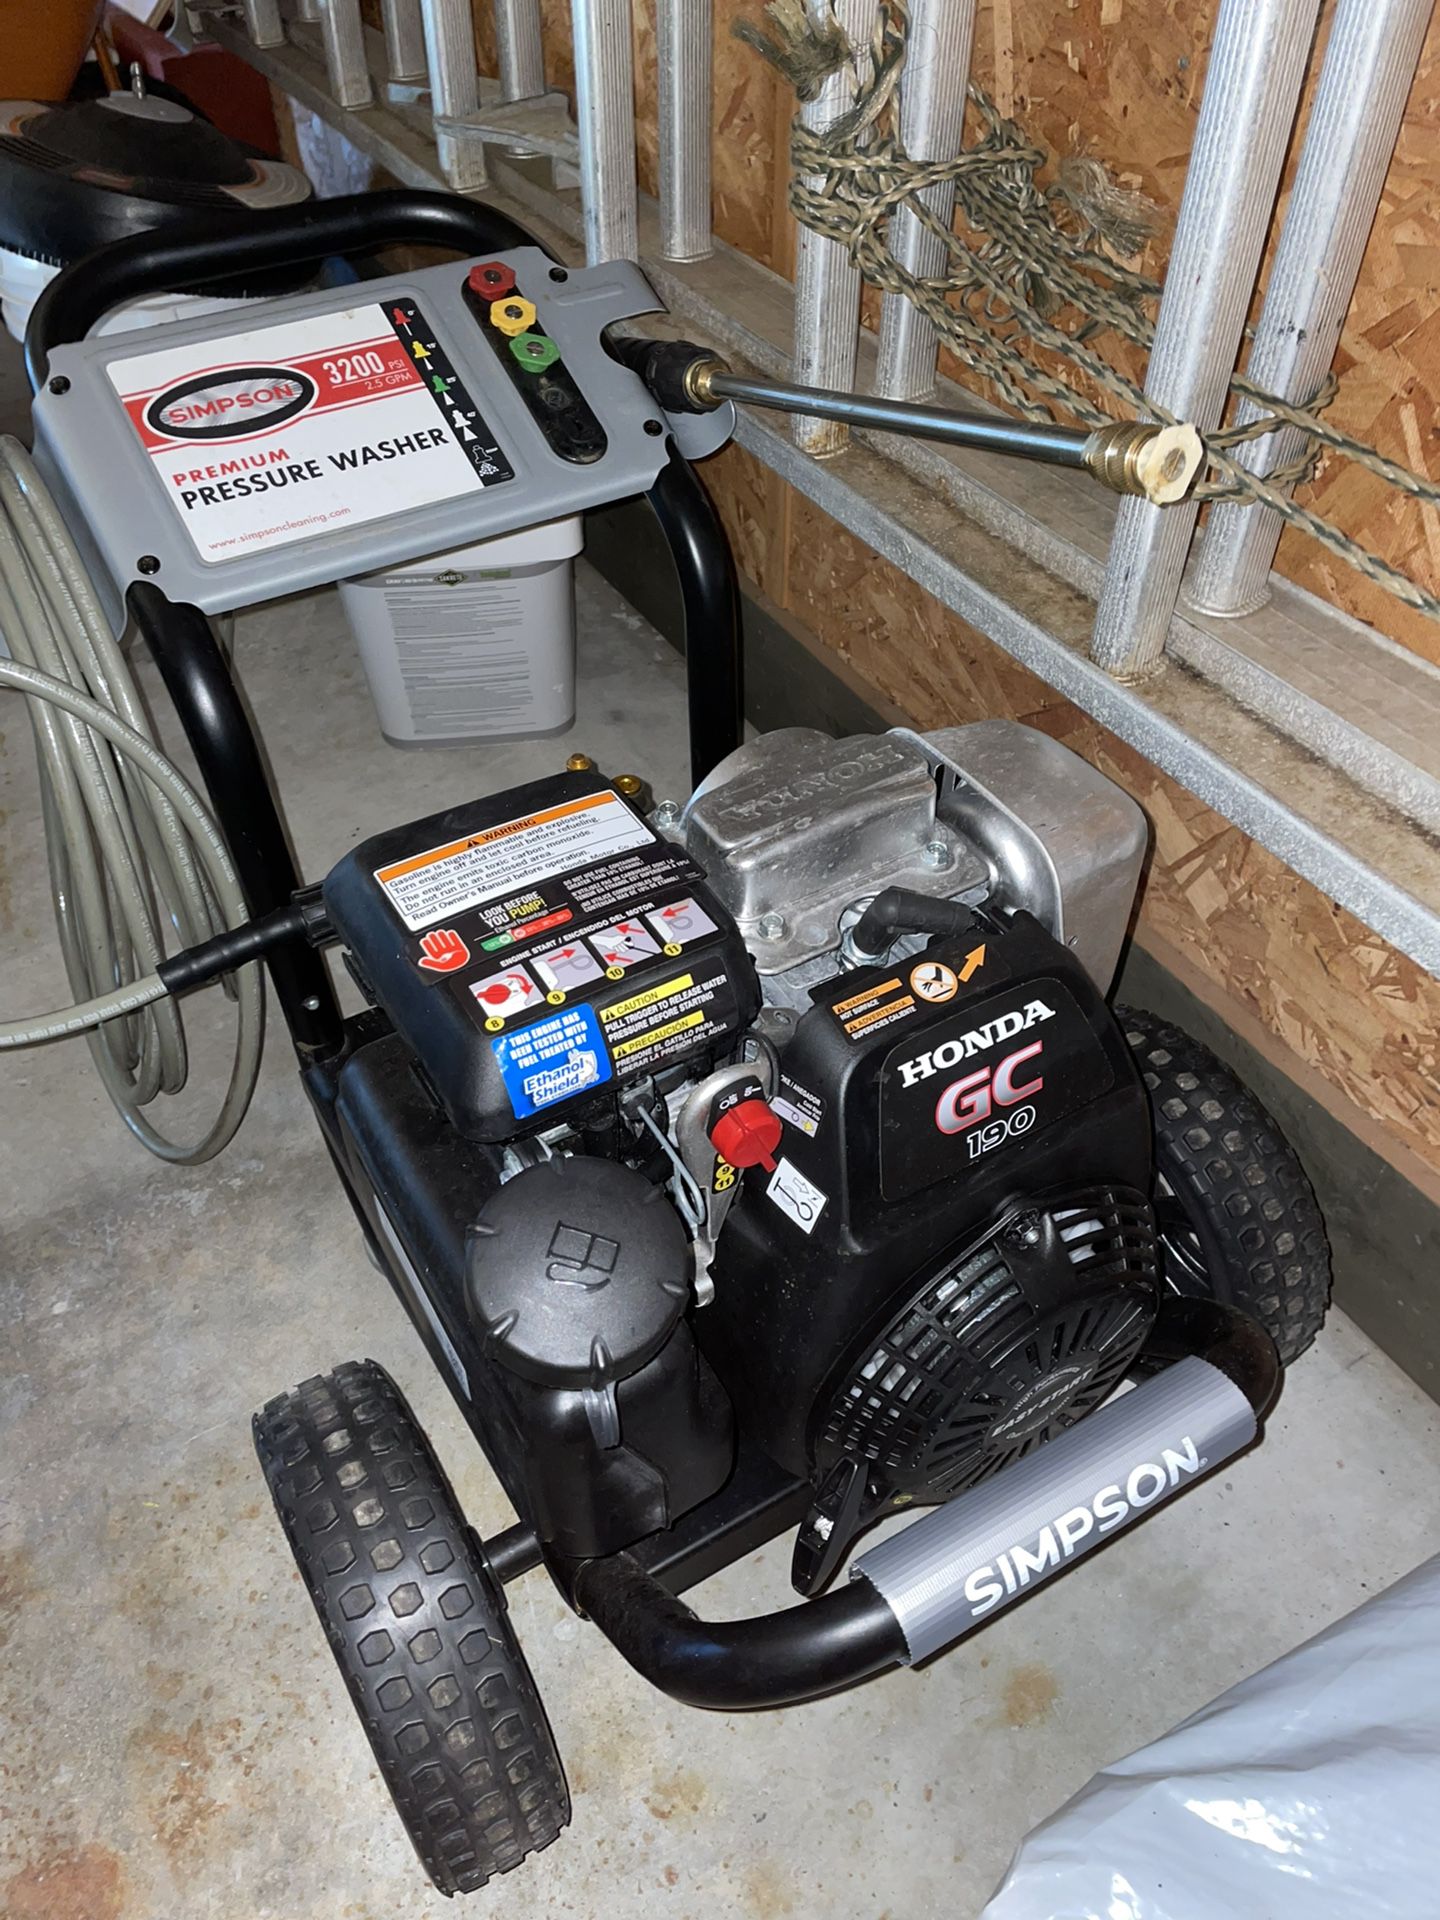 Simpson Cleaning MSH3125 MegaShot Gas Pressure Washer Powered by Honda GC190, 3200 PSI at 2.5 GPM, (49 State), black